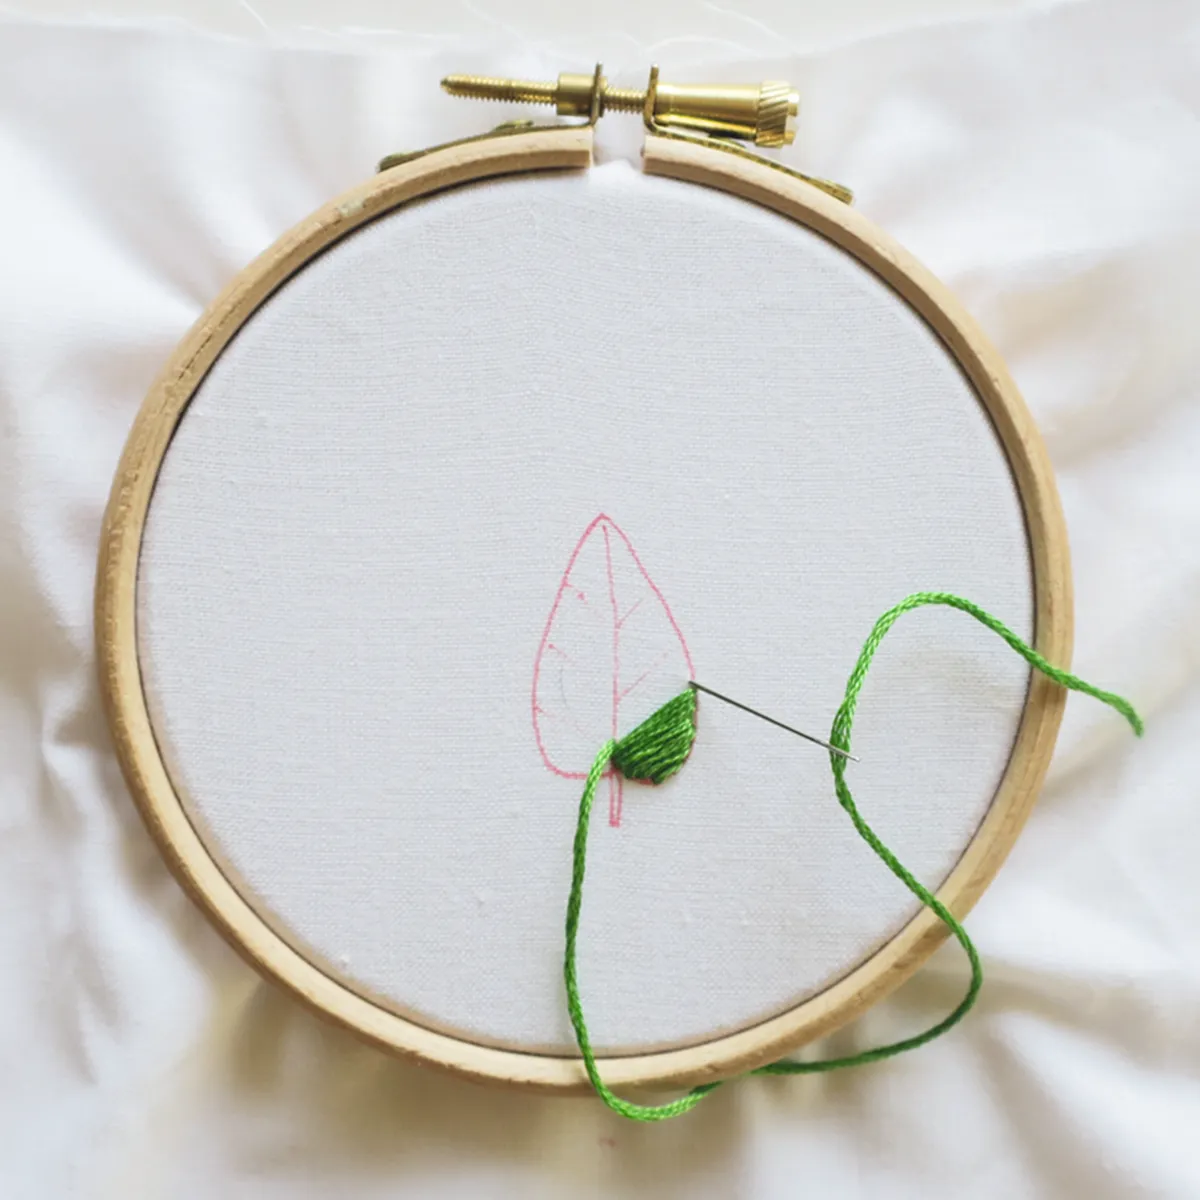 Best way to Make an Embroidered Fabric Patch - SewGuide